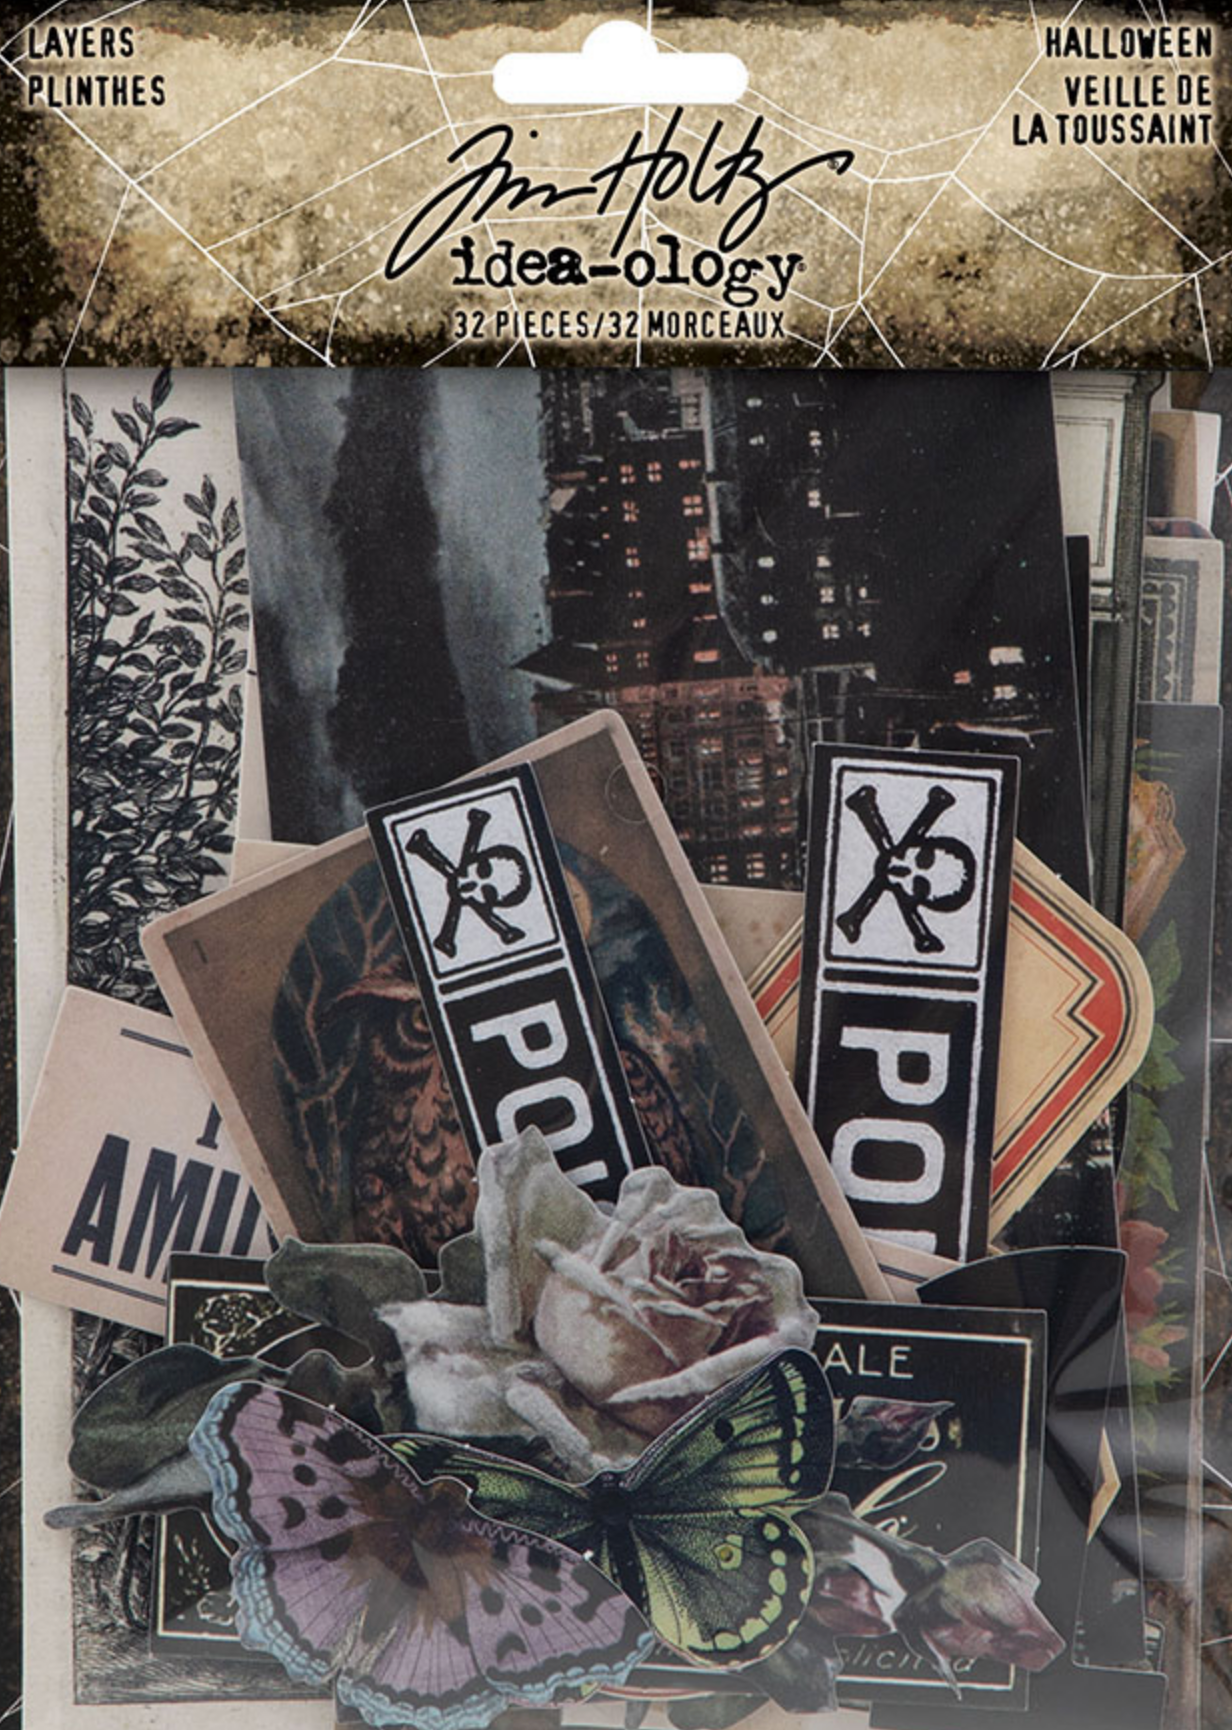 Halloween - Layers - Tim Holtz - Ideaology - Messy Papercrafts